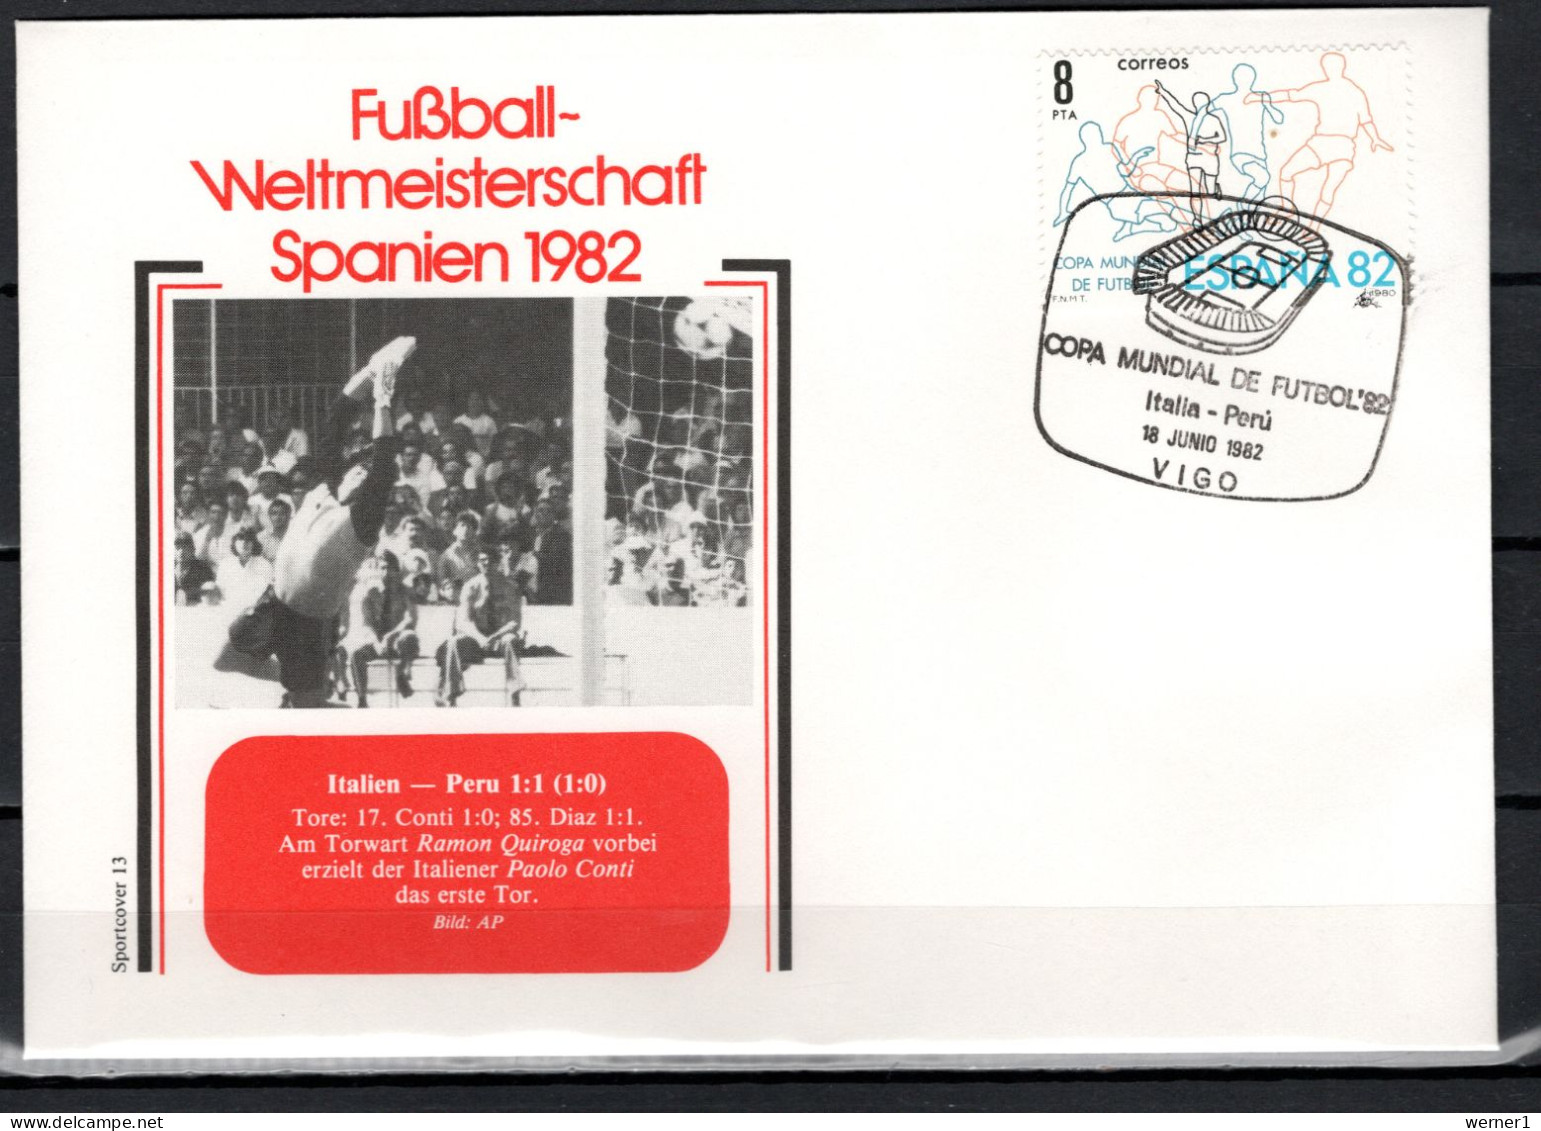 Spain 1982 Football Soccer World Cup Commemorative Cover Match Italy - Peru 1:1 - 1982 – Spain